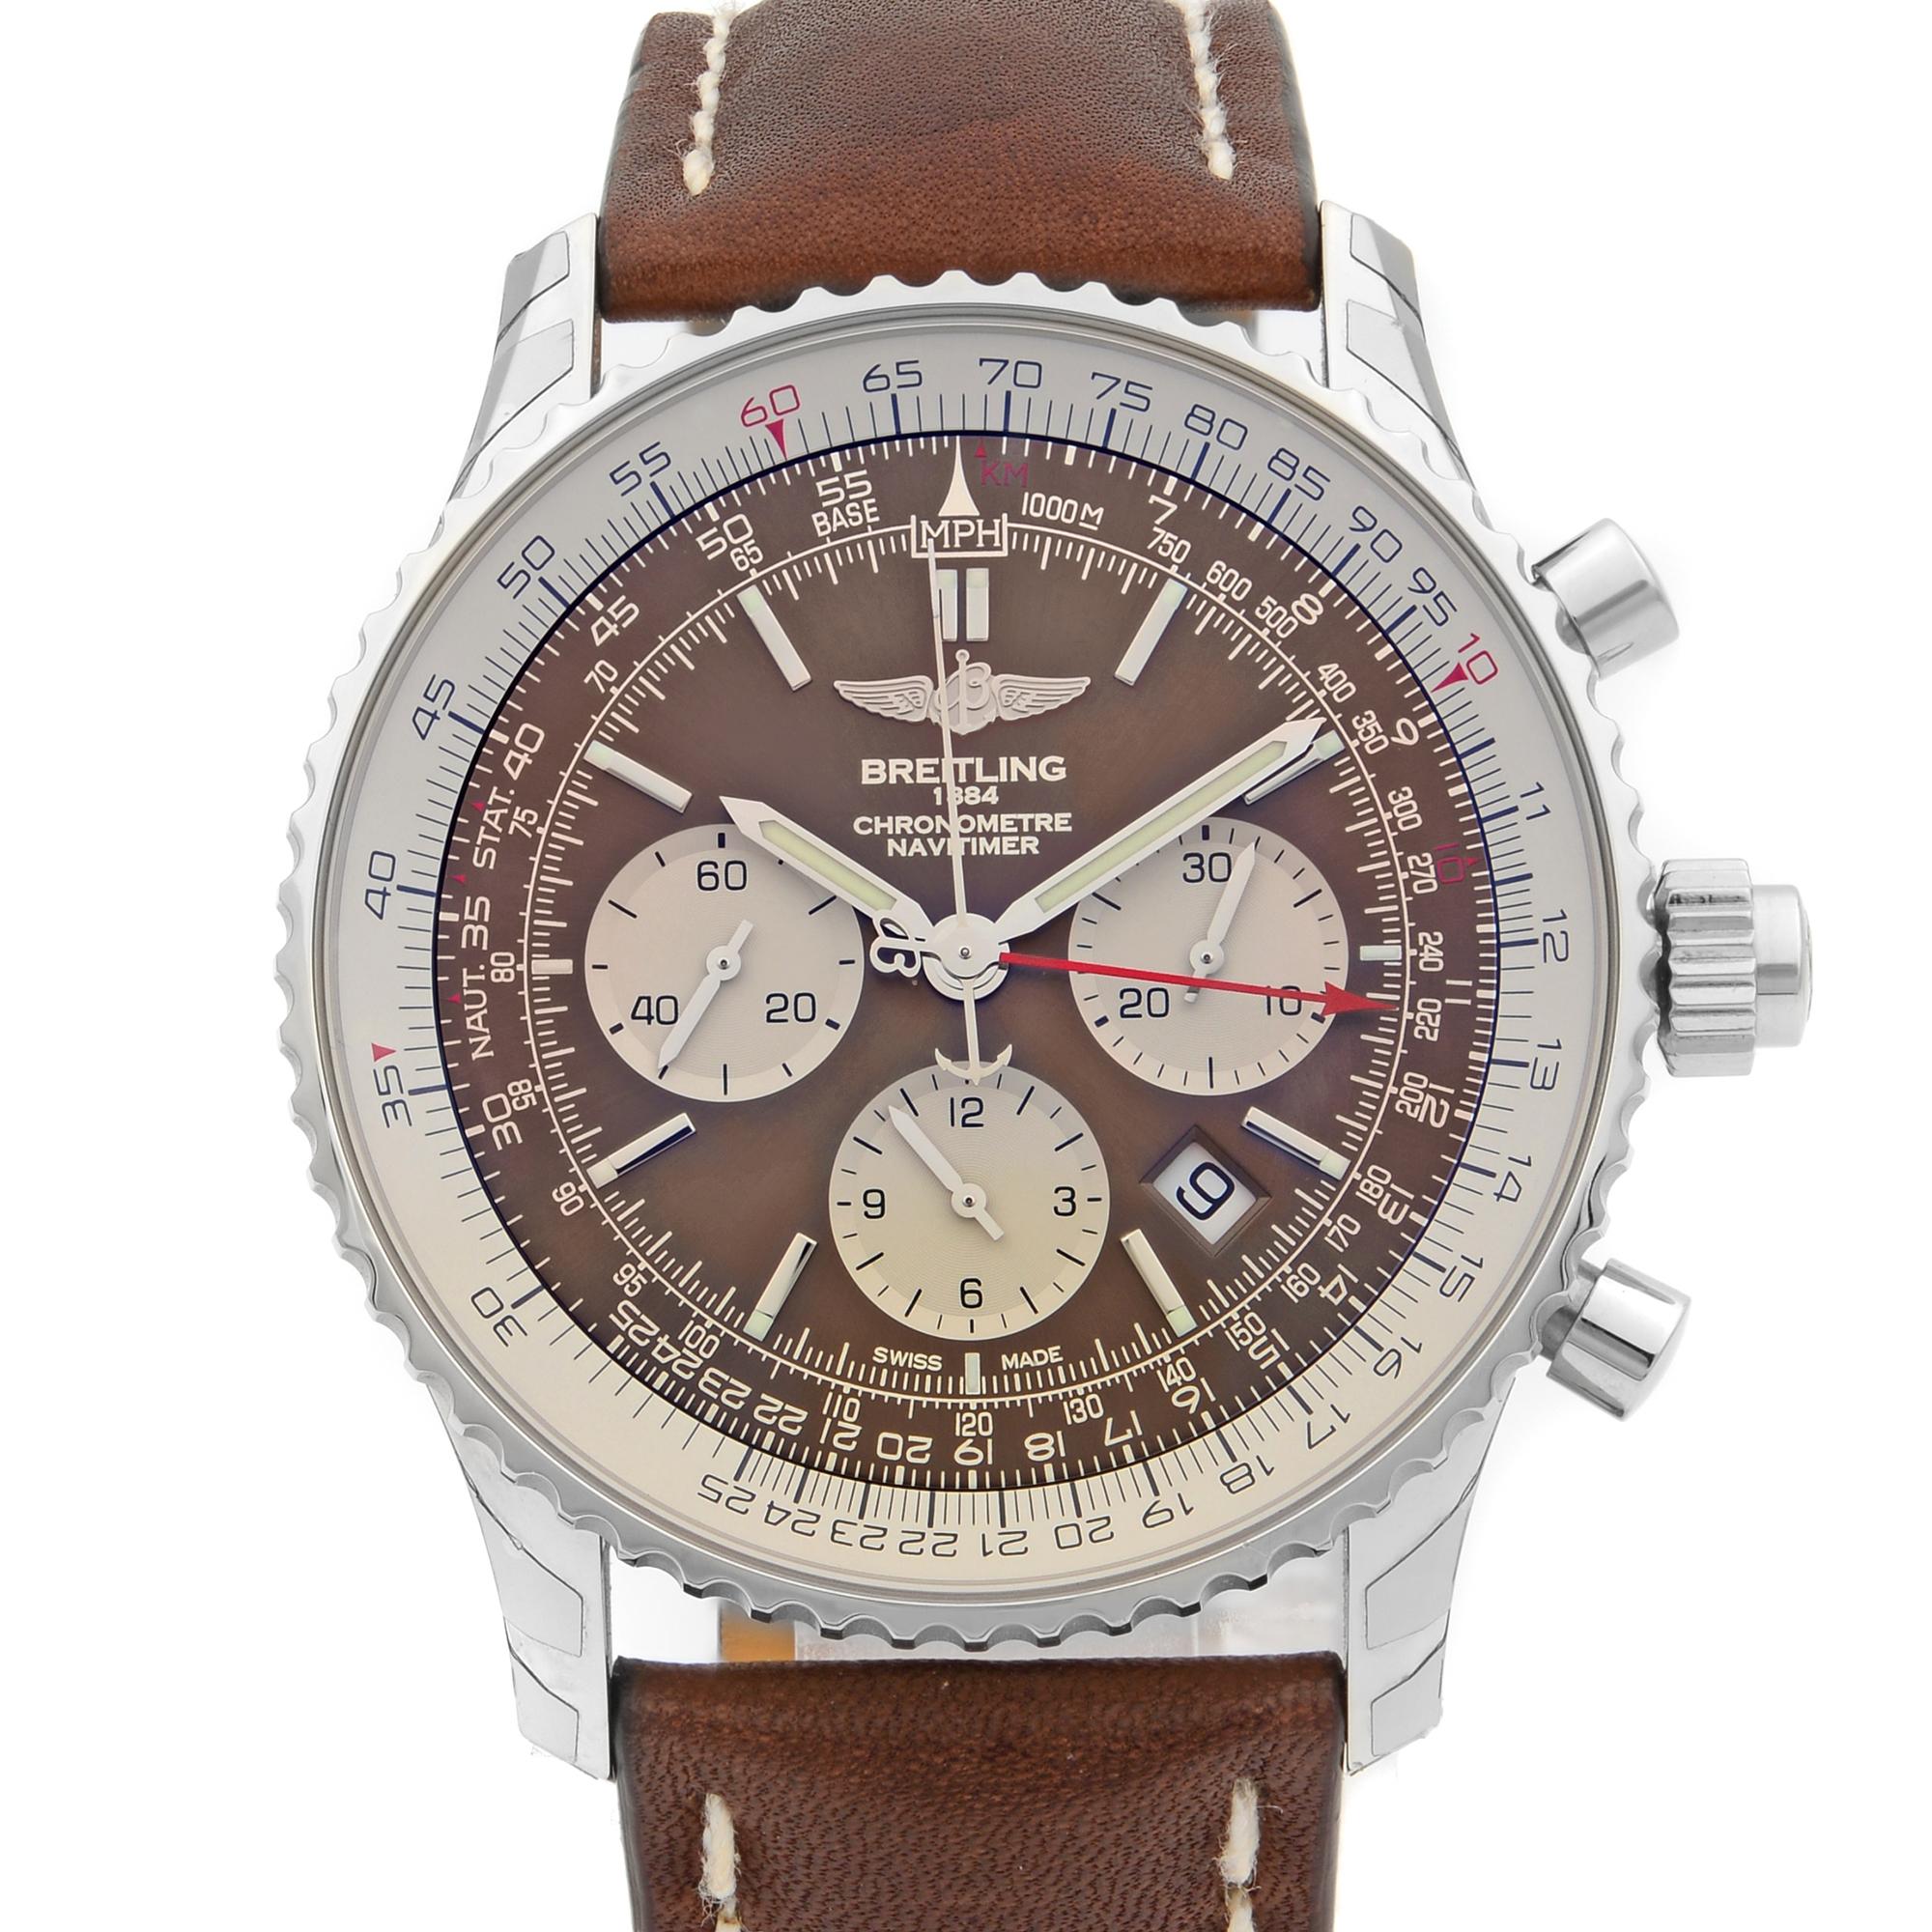 This New With Defects Breitling Navitimer  AB031021/Q615-443X  is a beautiful men's timepiece that is powered by an automatic movement which is cased in a stainless steel case. It has a round shape face, chronograph, chronograph hand, small seconds